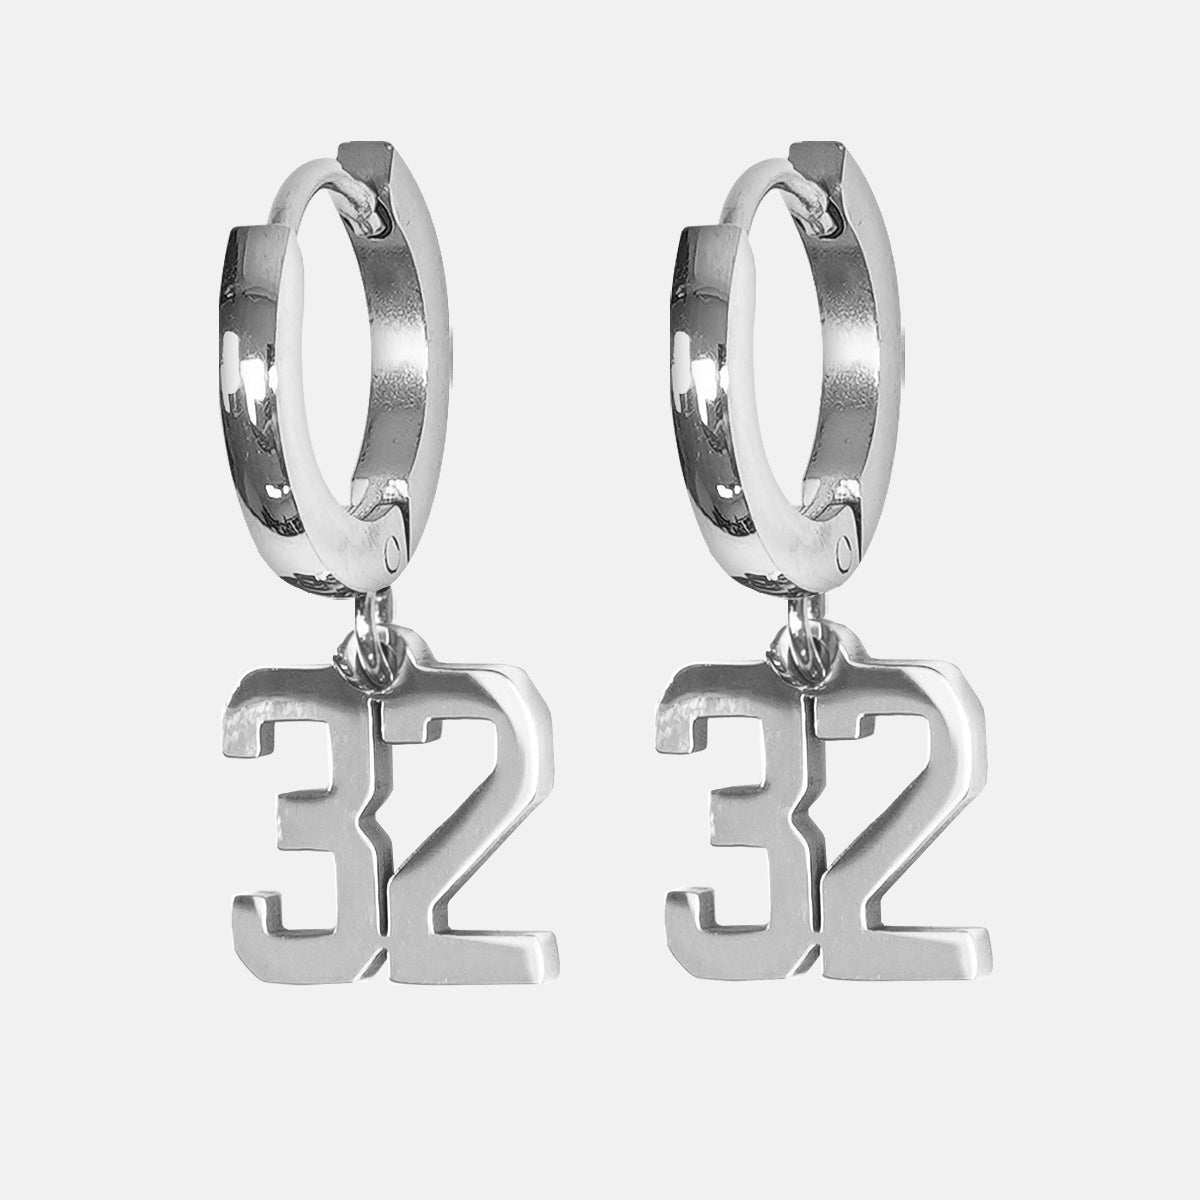 32 Number Earring - Stainless Steel